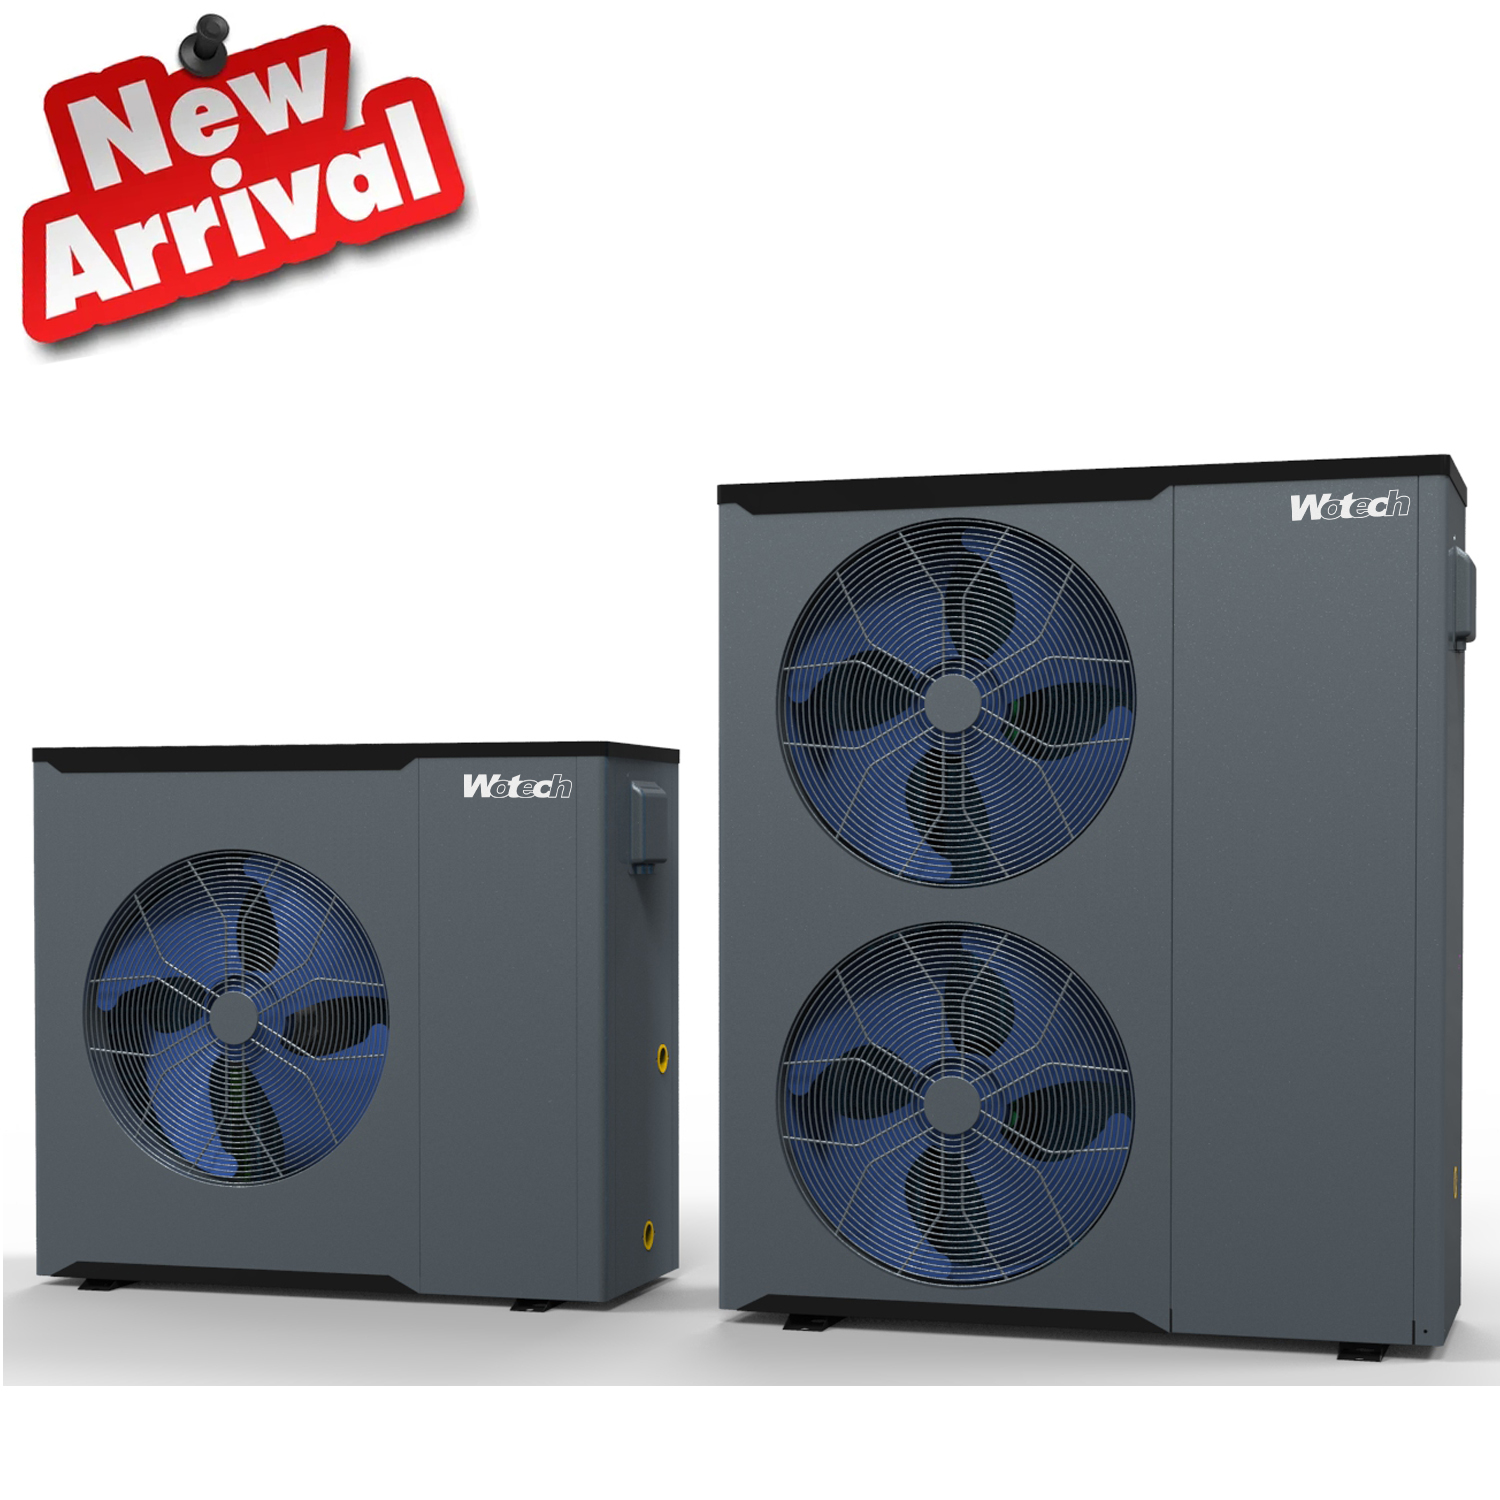 R32 A+++ Residentail Air Source Heat Pump with Wifi Function